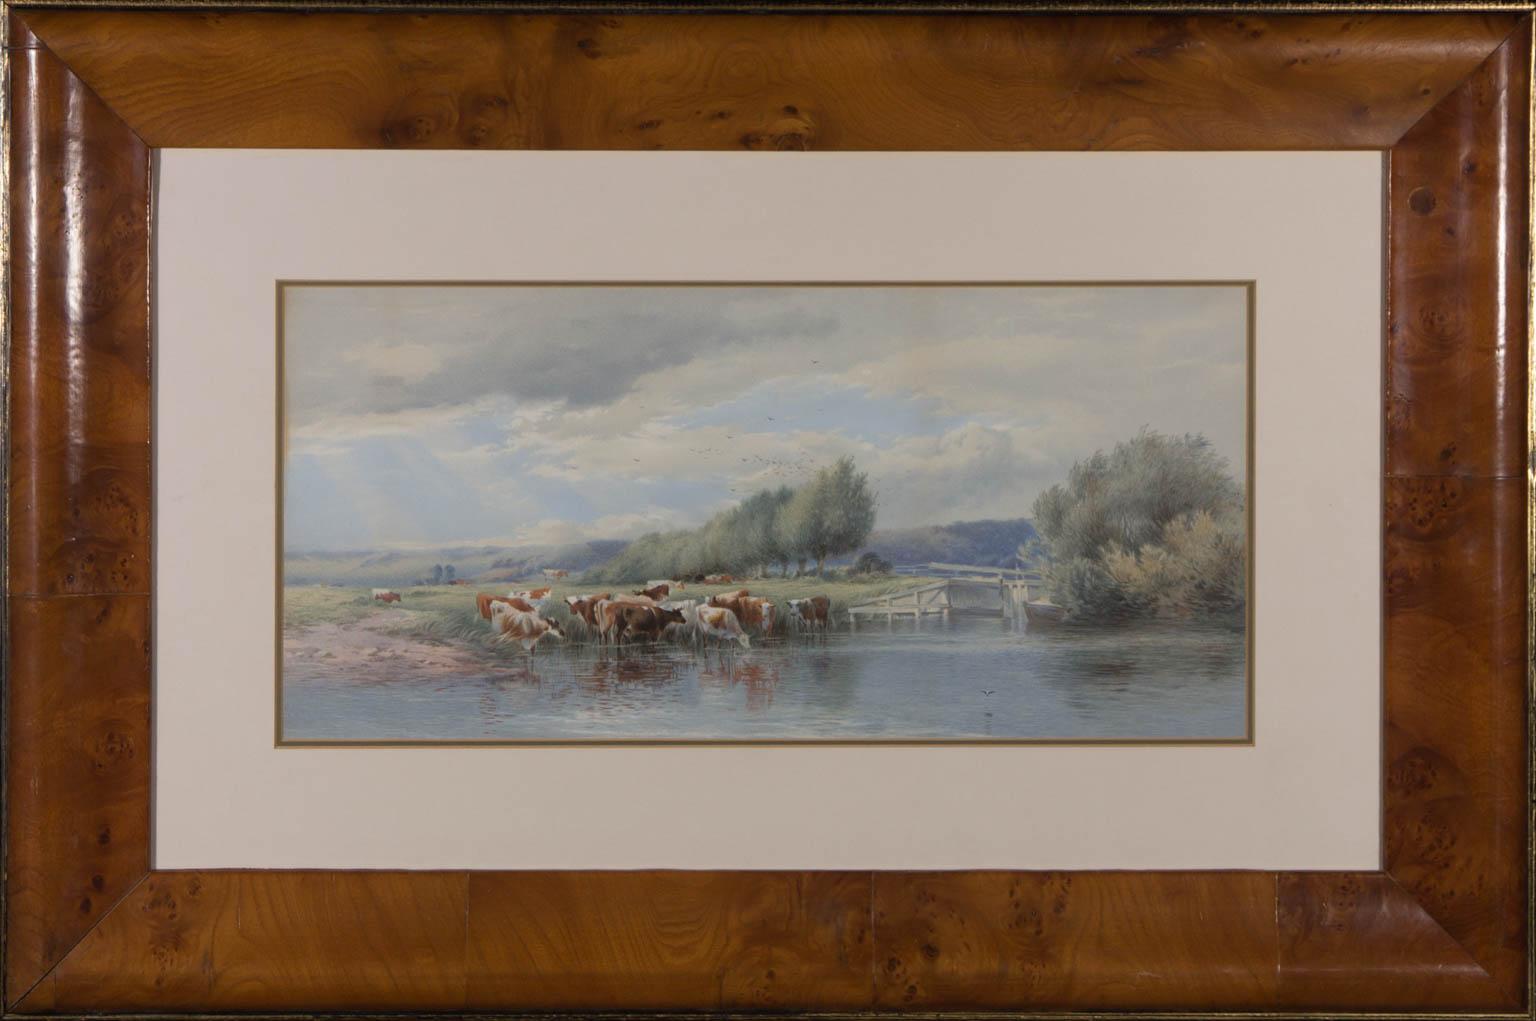 Unknown Landscape Art - Framed 20th Century Watercolour - Cows by the Riverside